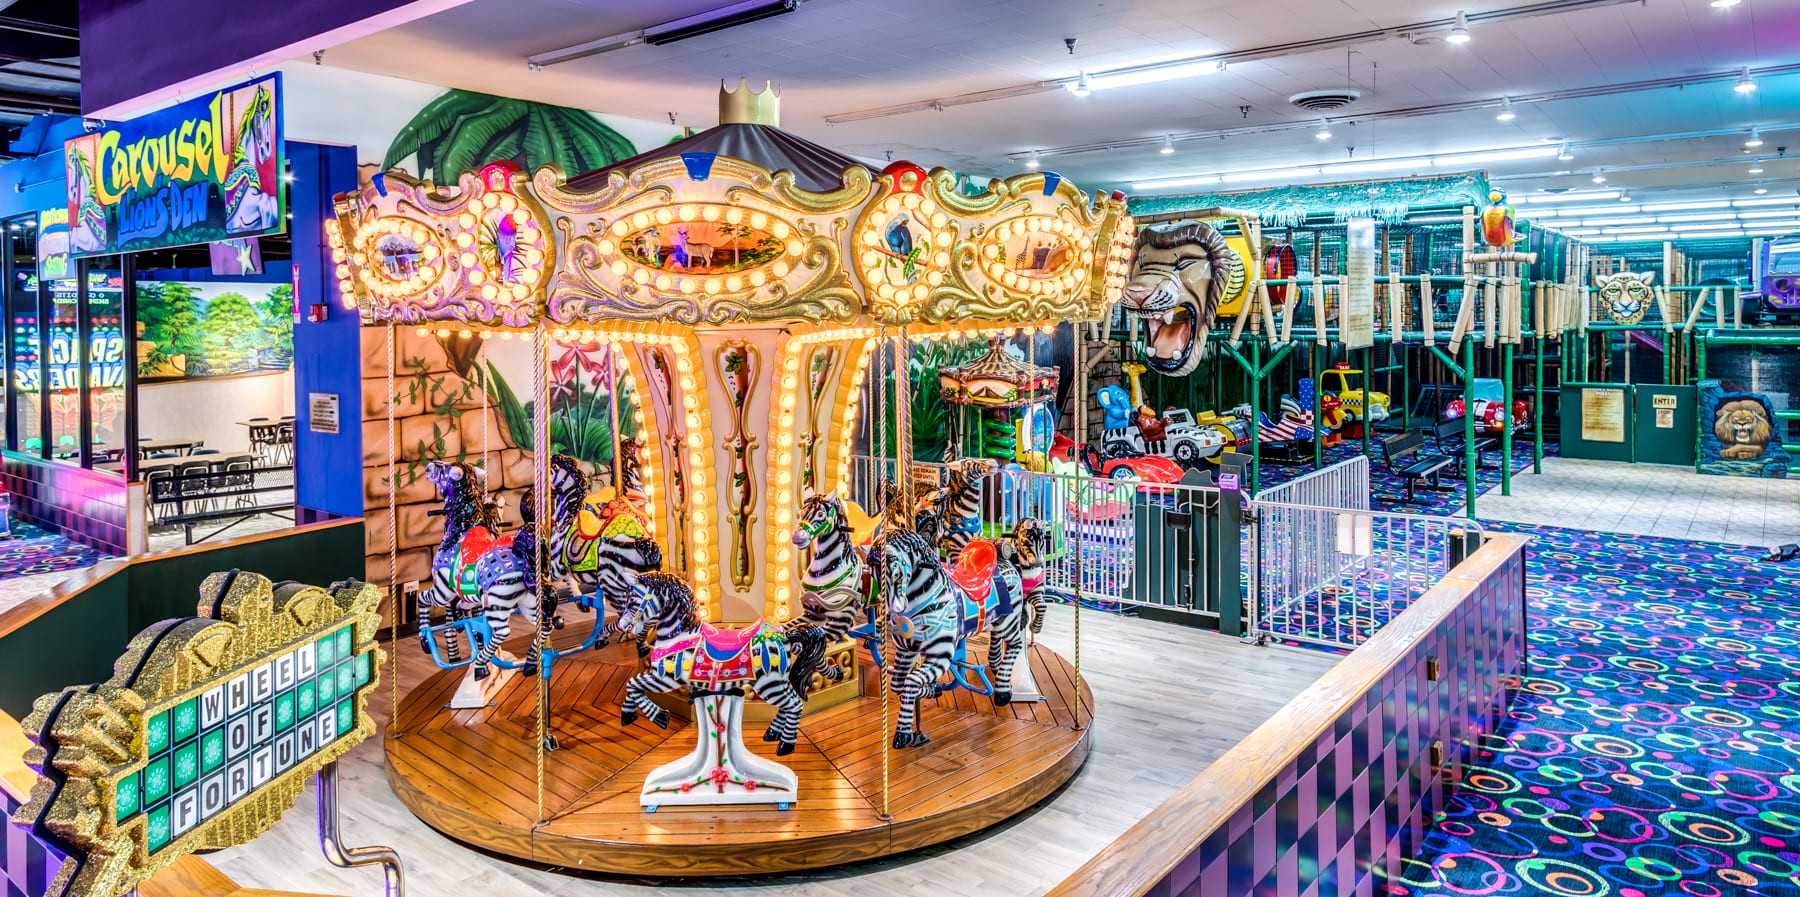 A carousel with many people inside of it